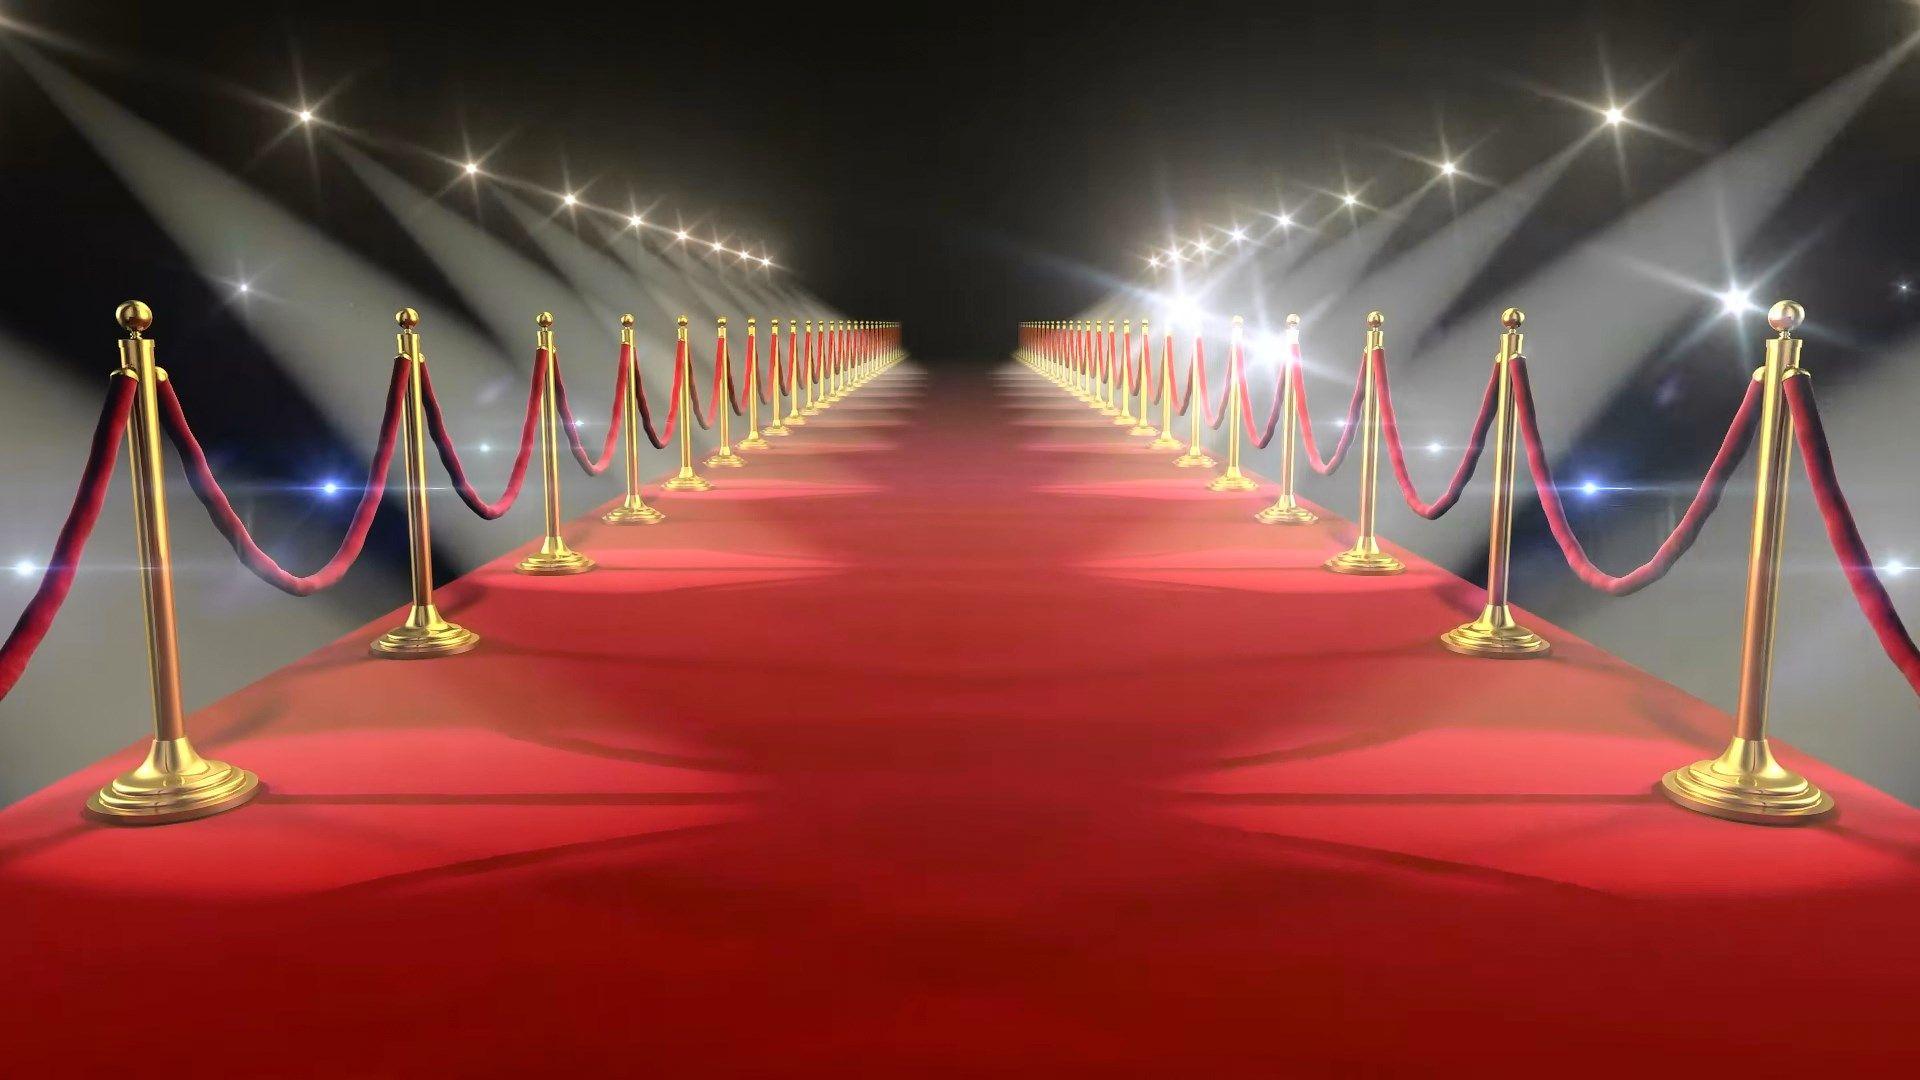 red carpet background 11. Background Check All